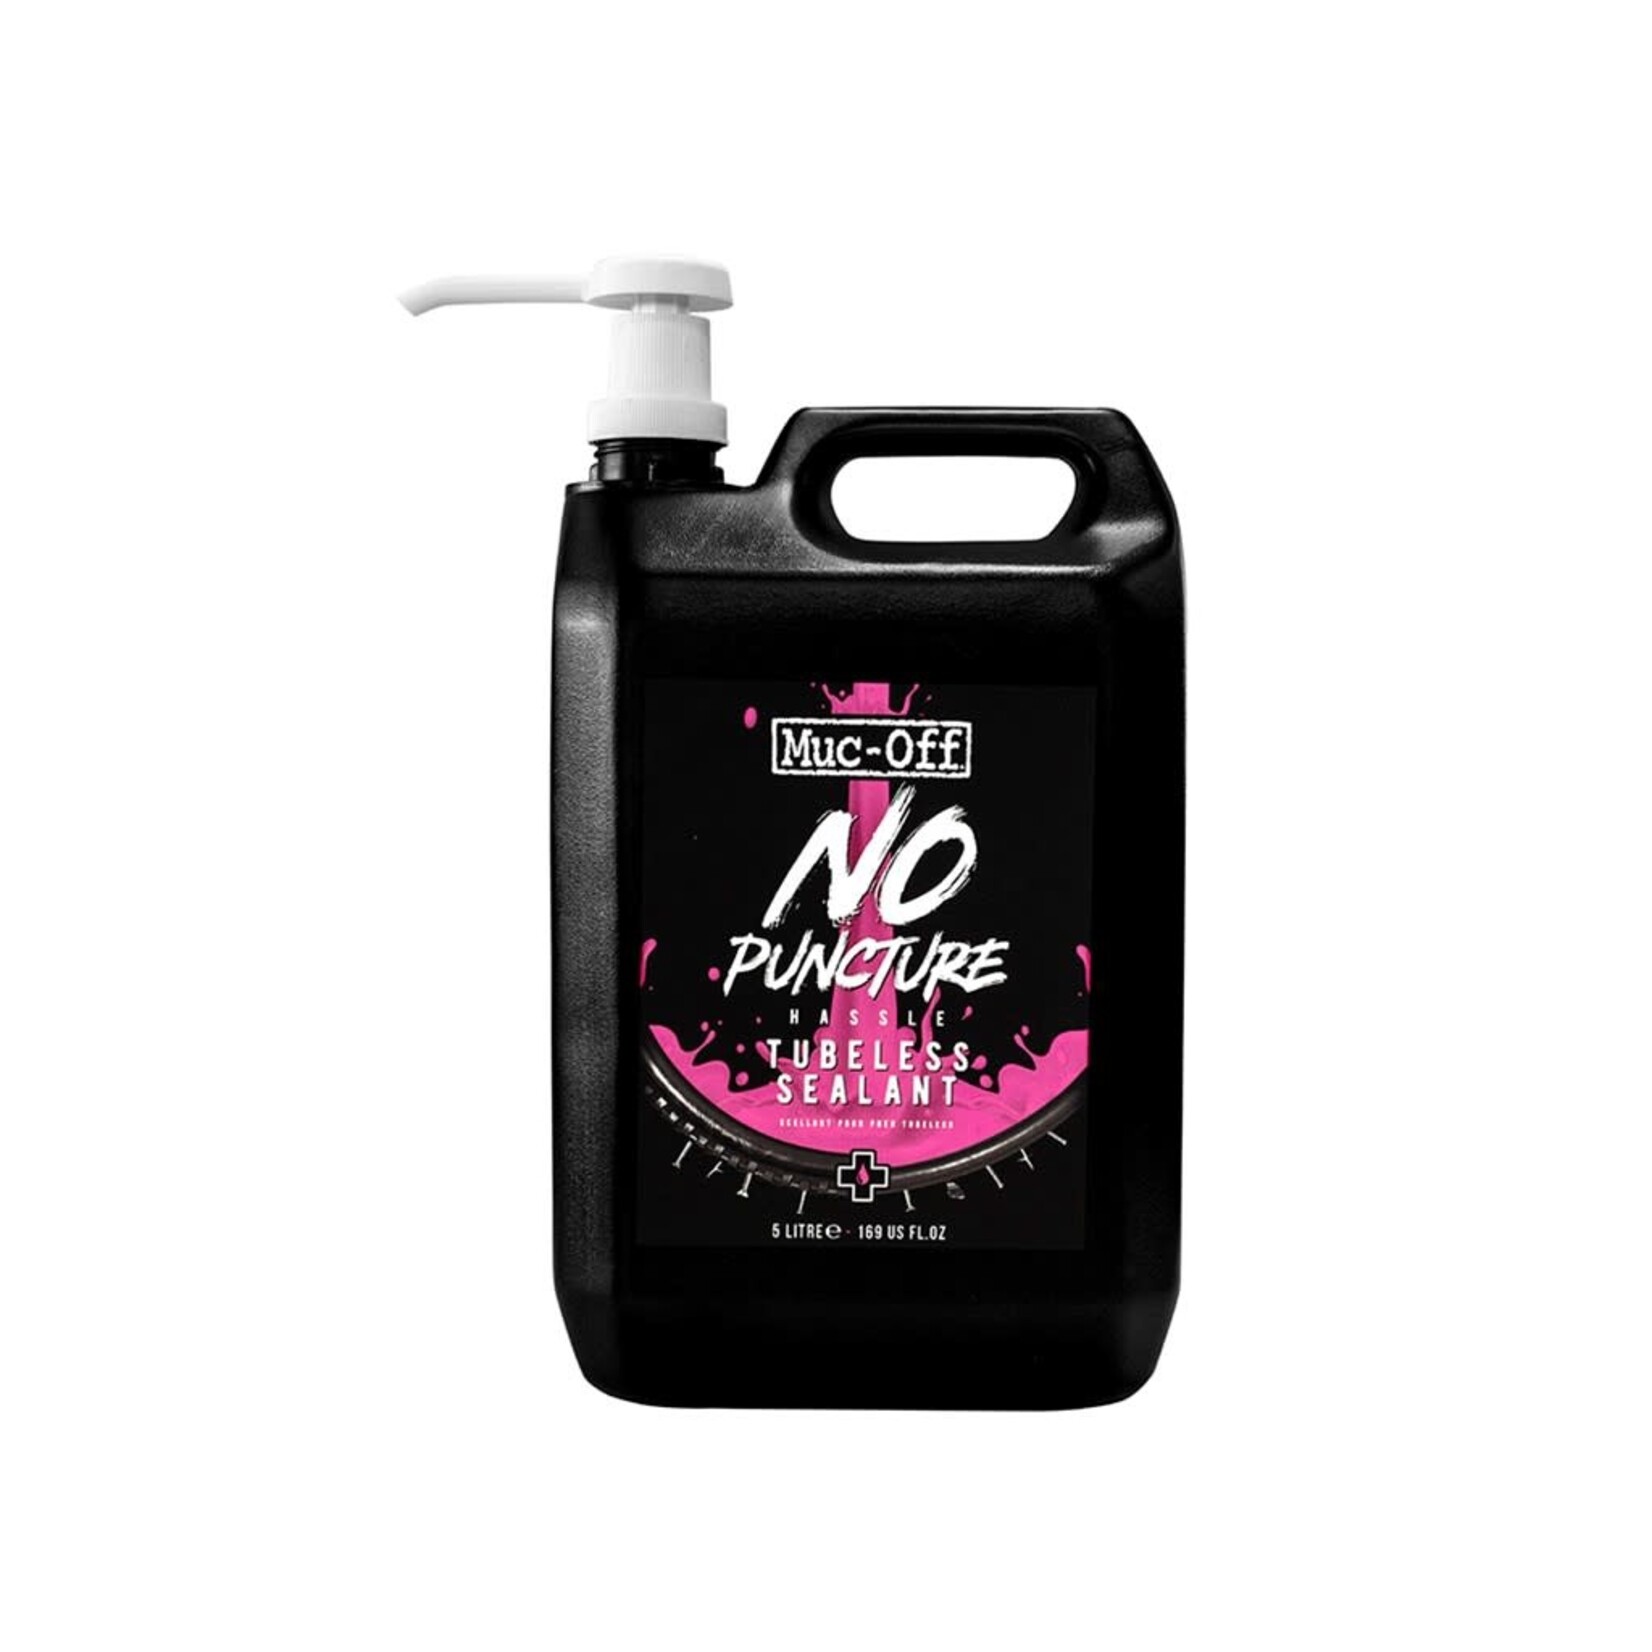 Muc-Off Muc-Off, No Puncture Hassle Tubeless Sealant, 5L